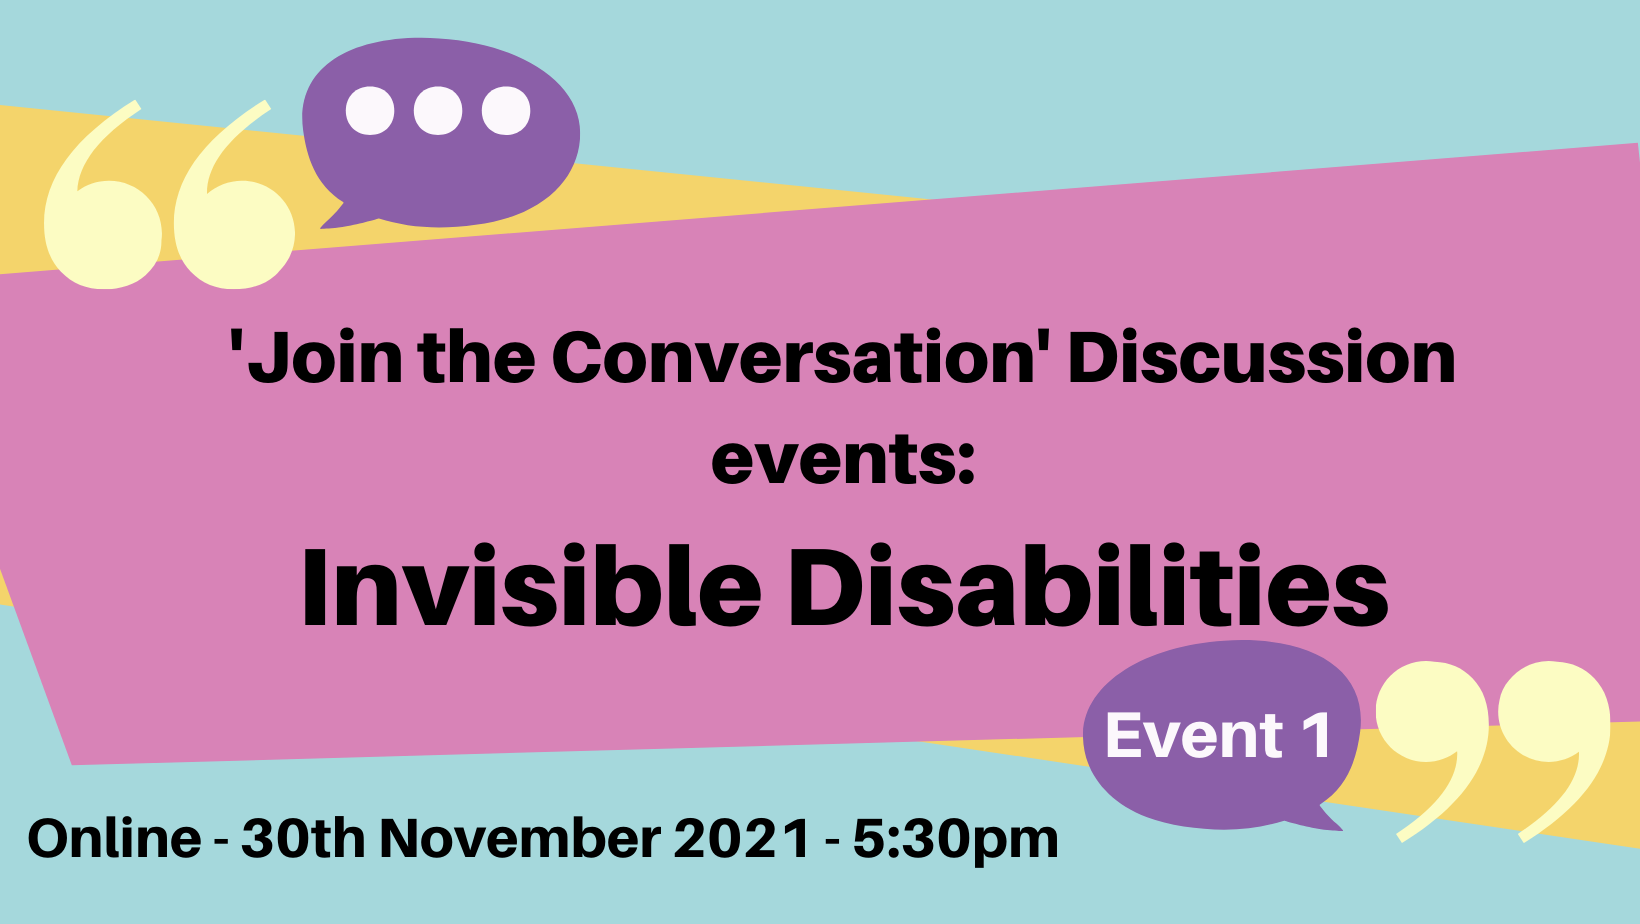 Decorative image: “Join the Conversation- DIscussion events: Invisible Disabilities. Online- 30 November, 5.30pm”